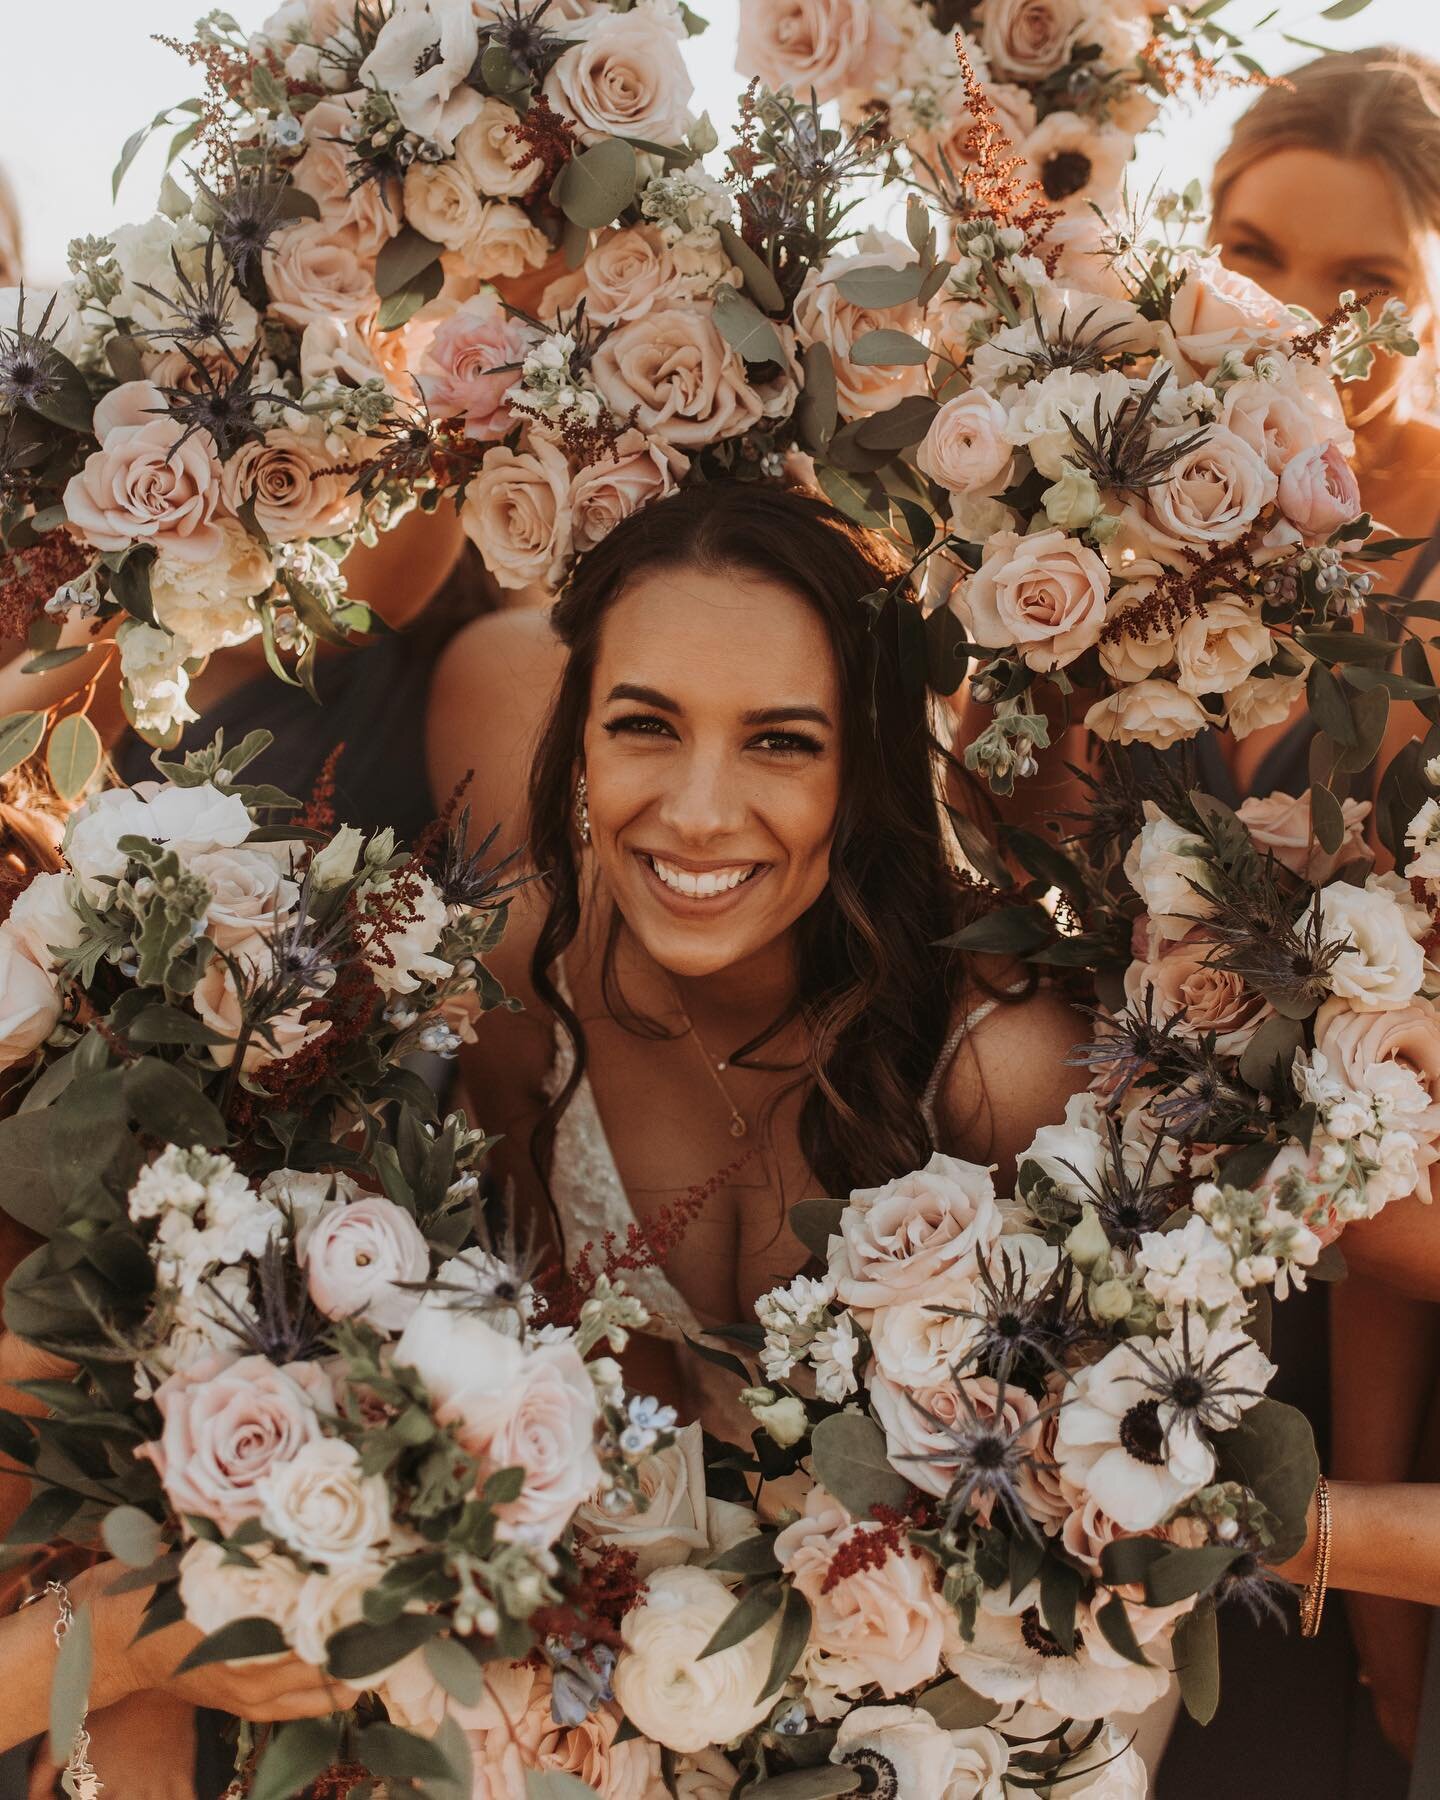 I am here for this &lsquo;halo of flowers&rsquo; trend around the bride!